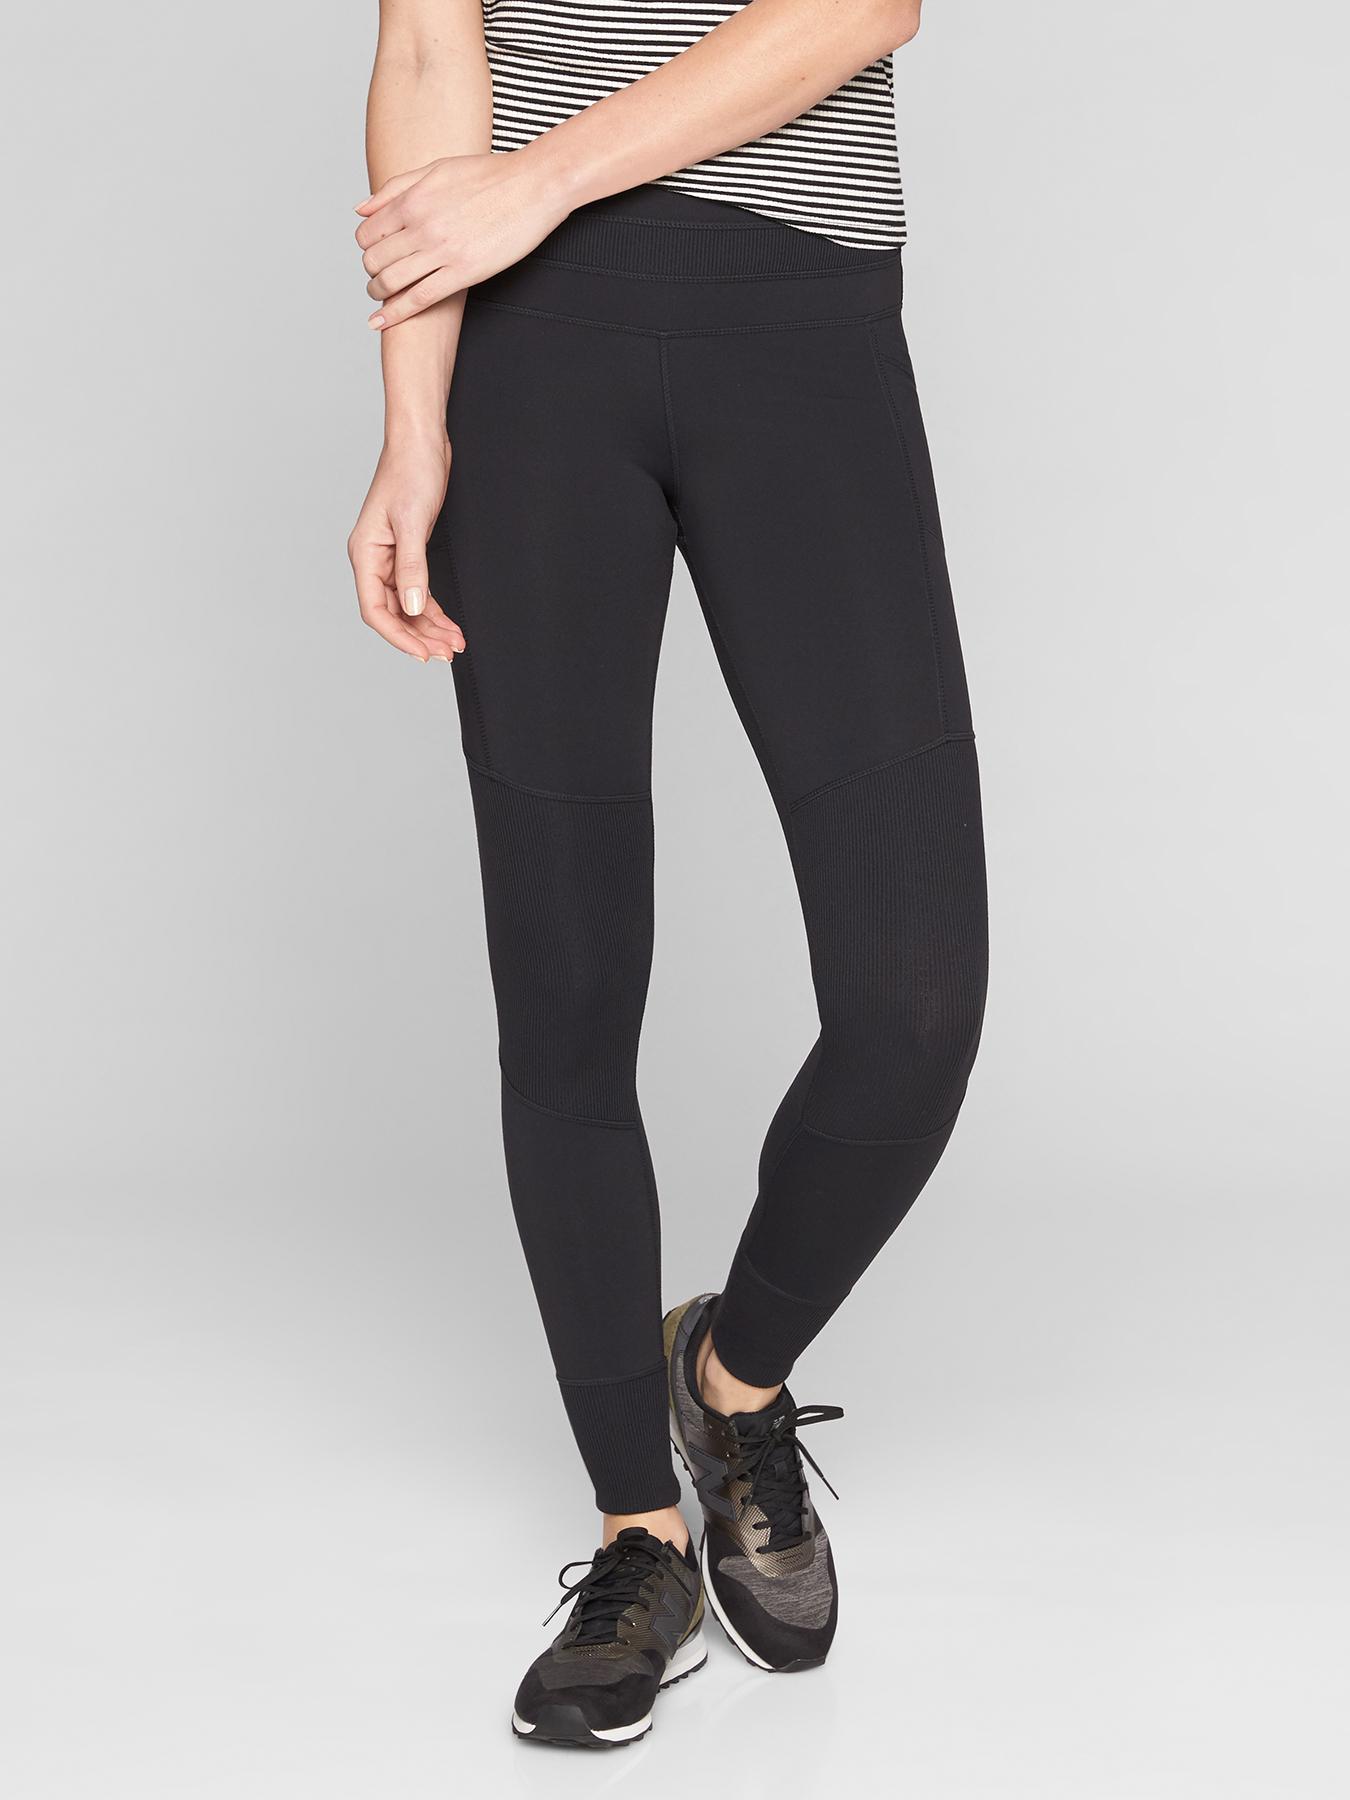 Athleta Water Sports Athletic Tights for Women